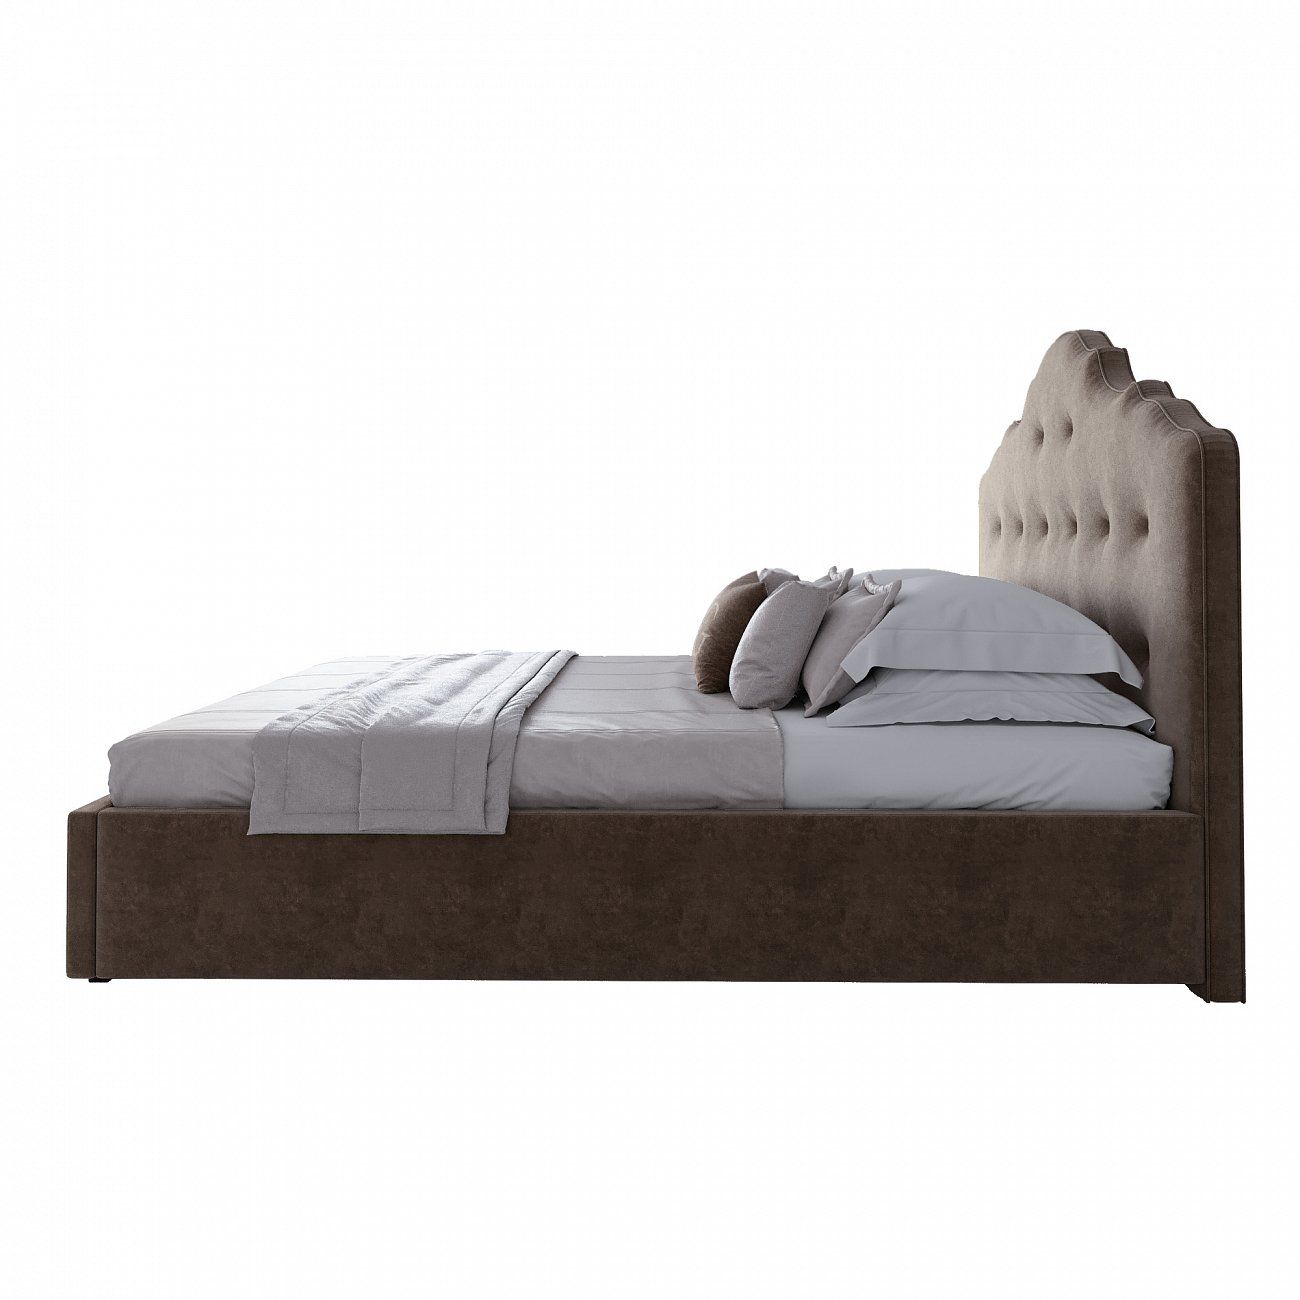 Double bed 180x200 cm brown Palace